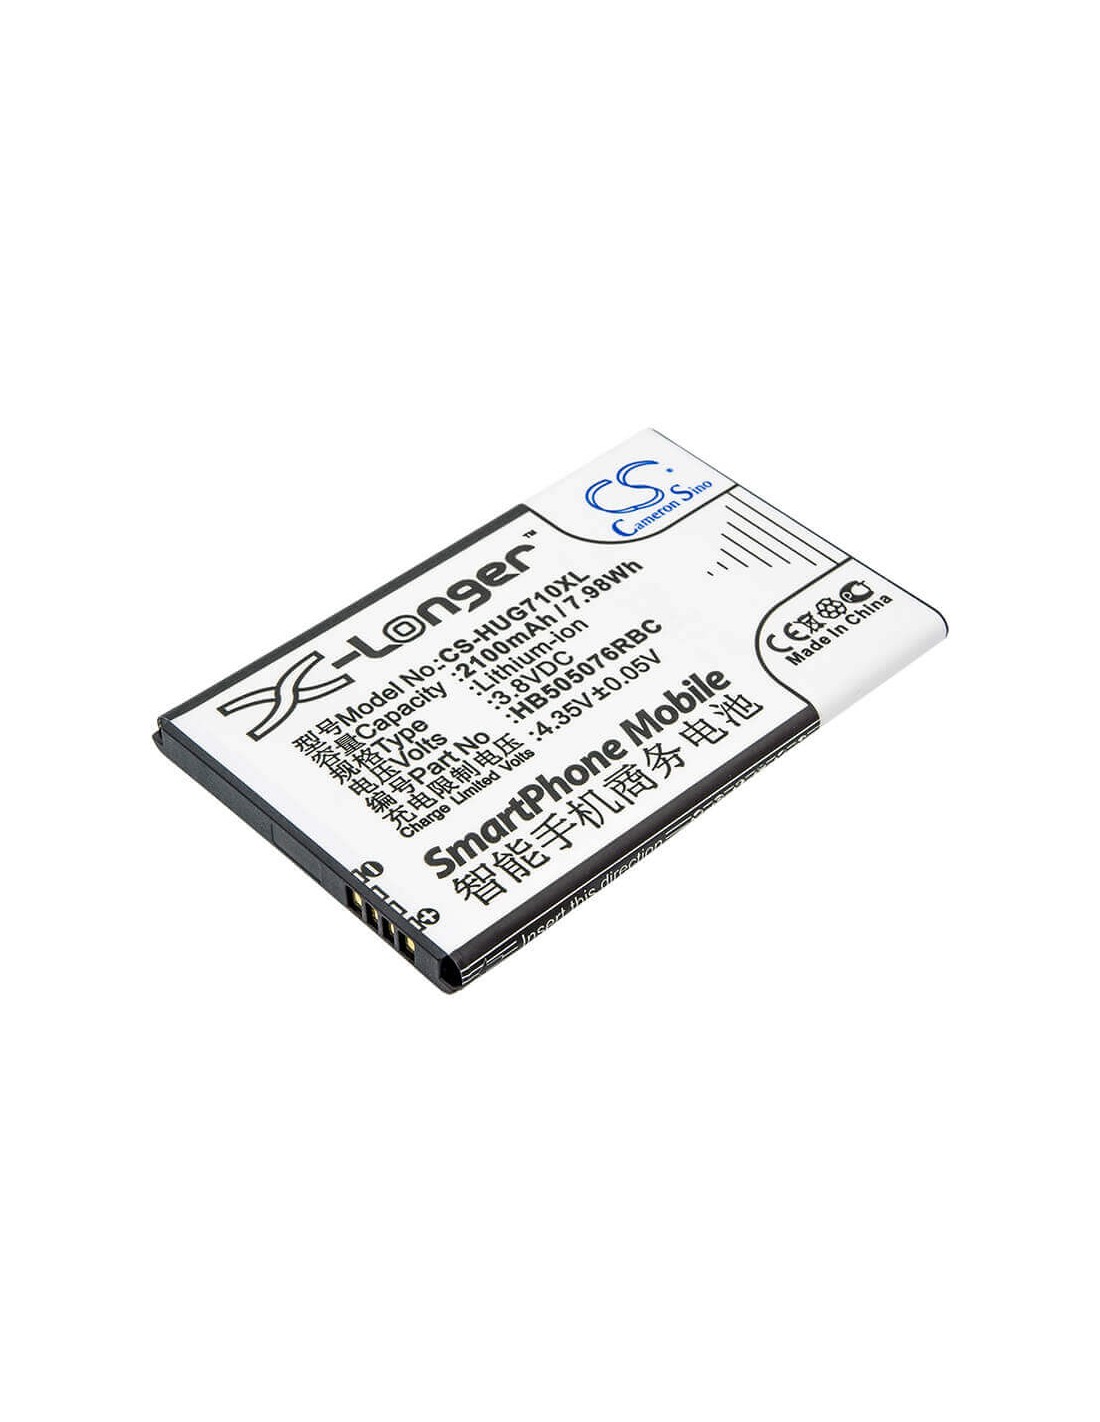 Battery for Huawei A199, Ascend G710, G606 3.8V, 2100mAh - 7.98Wh